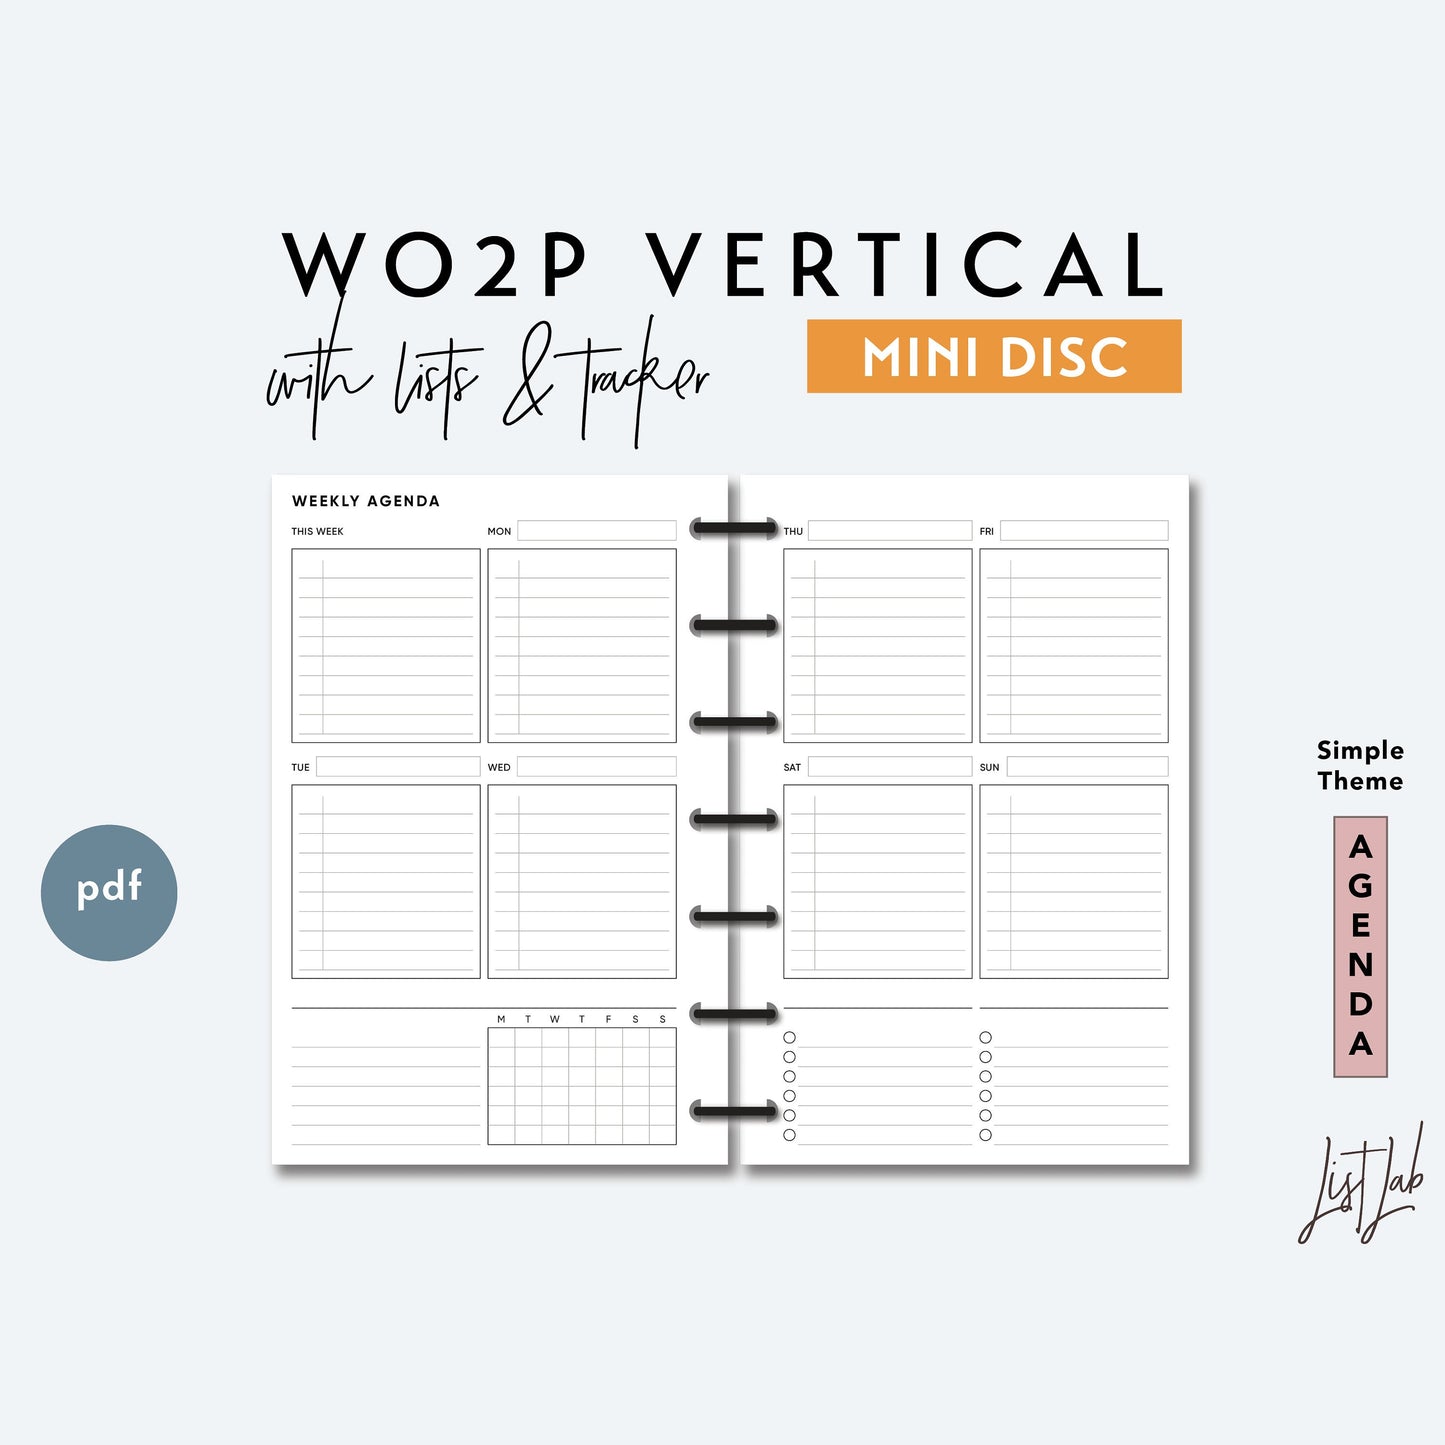 MINI Discbound WO2P VERTICAL with Lists and Tracker Printable Insert Set